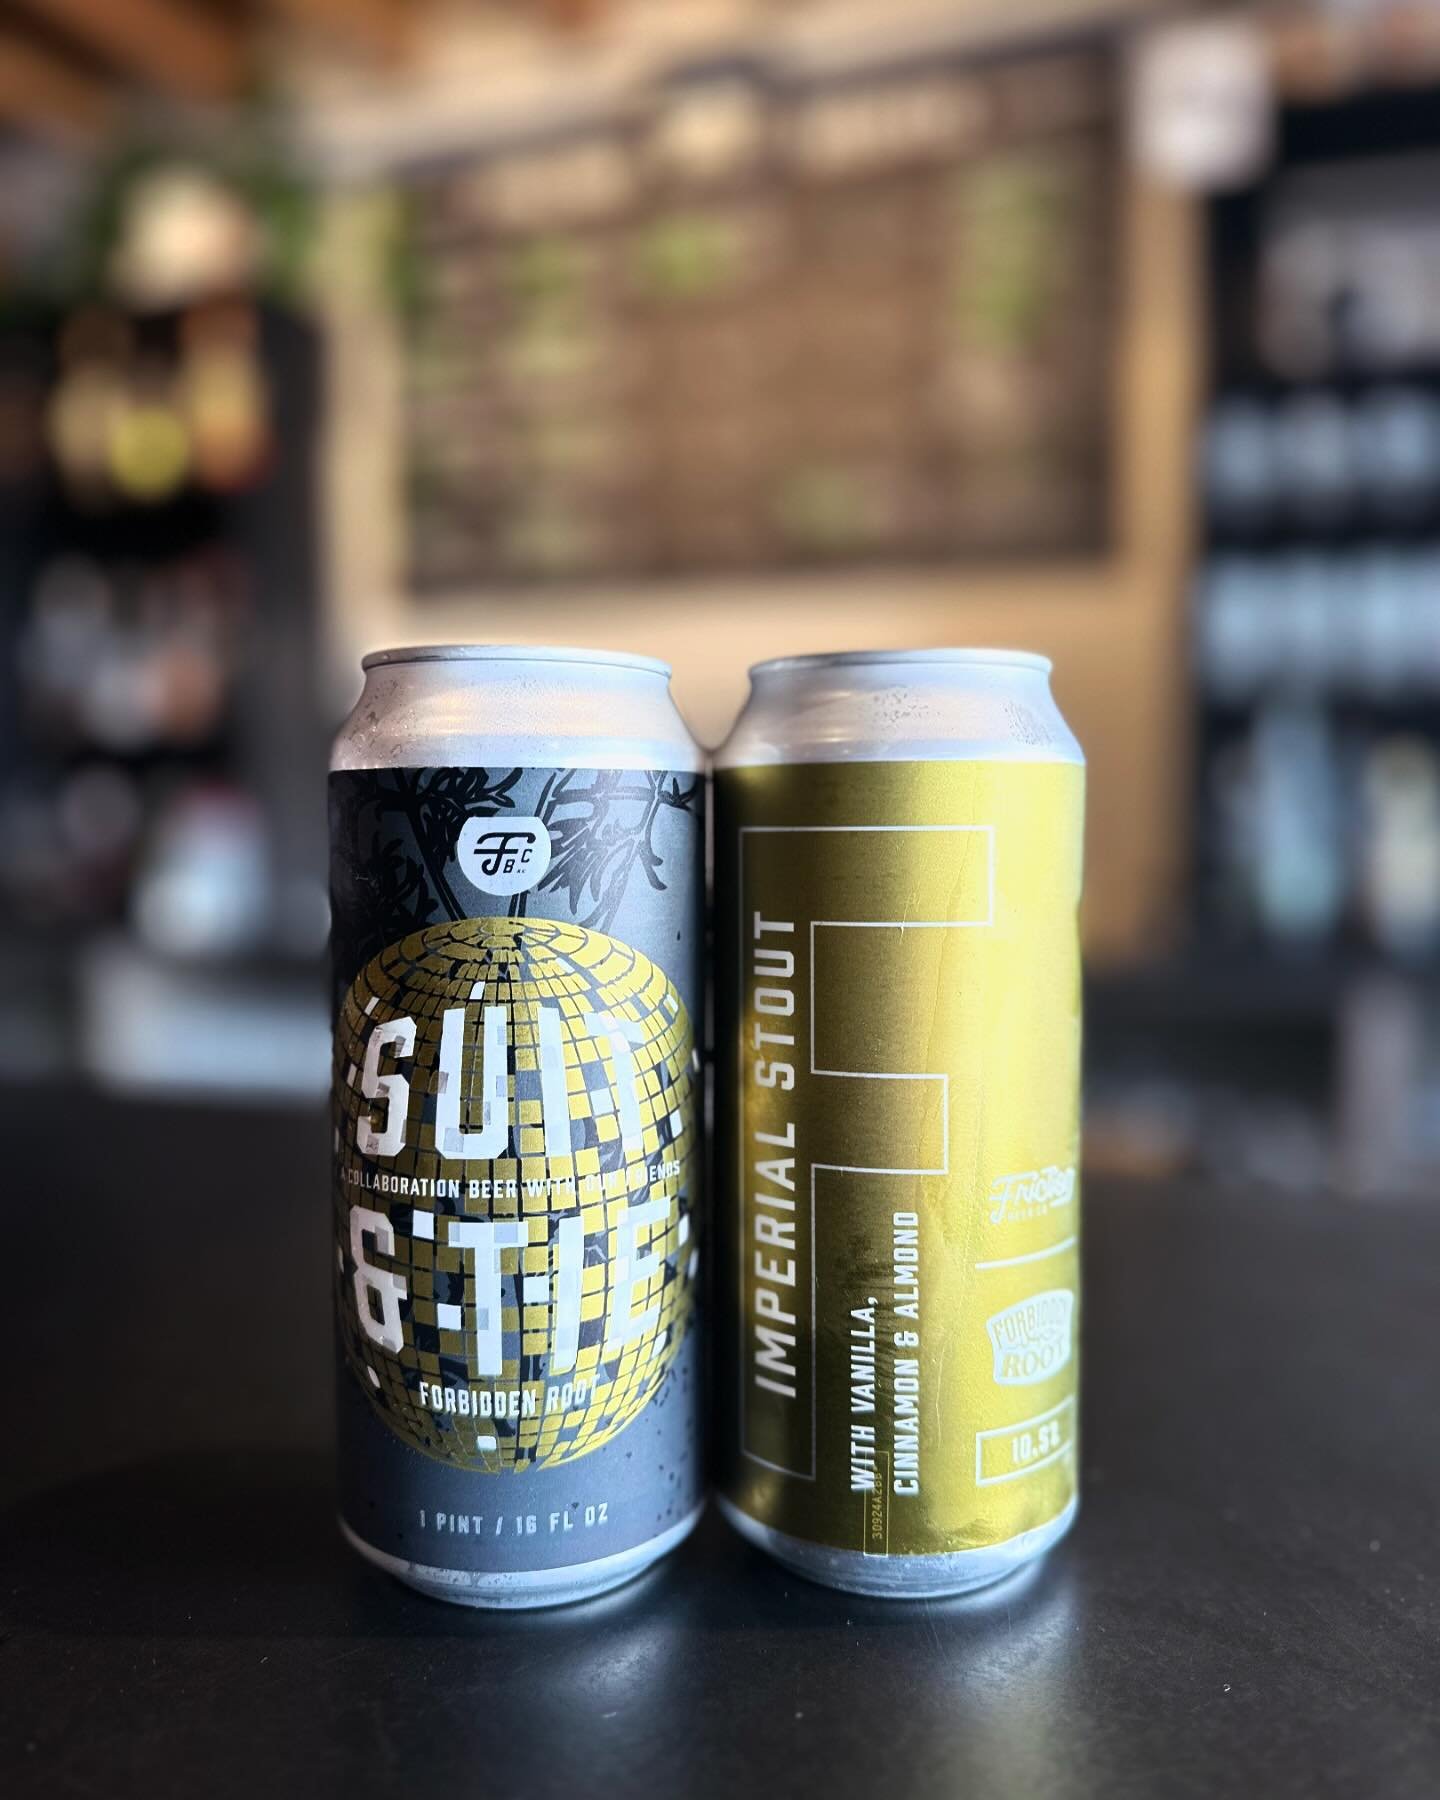 It&rsquo;s American Craft Beer Week! Let&rsquo;s celebrate in all the best ways. The first is we are releasing our already highly thought of imperial stout, Suit &amp; Tie, in cans. This collab with our friends @forbiddenroot and @forbiddenrootcolumb